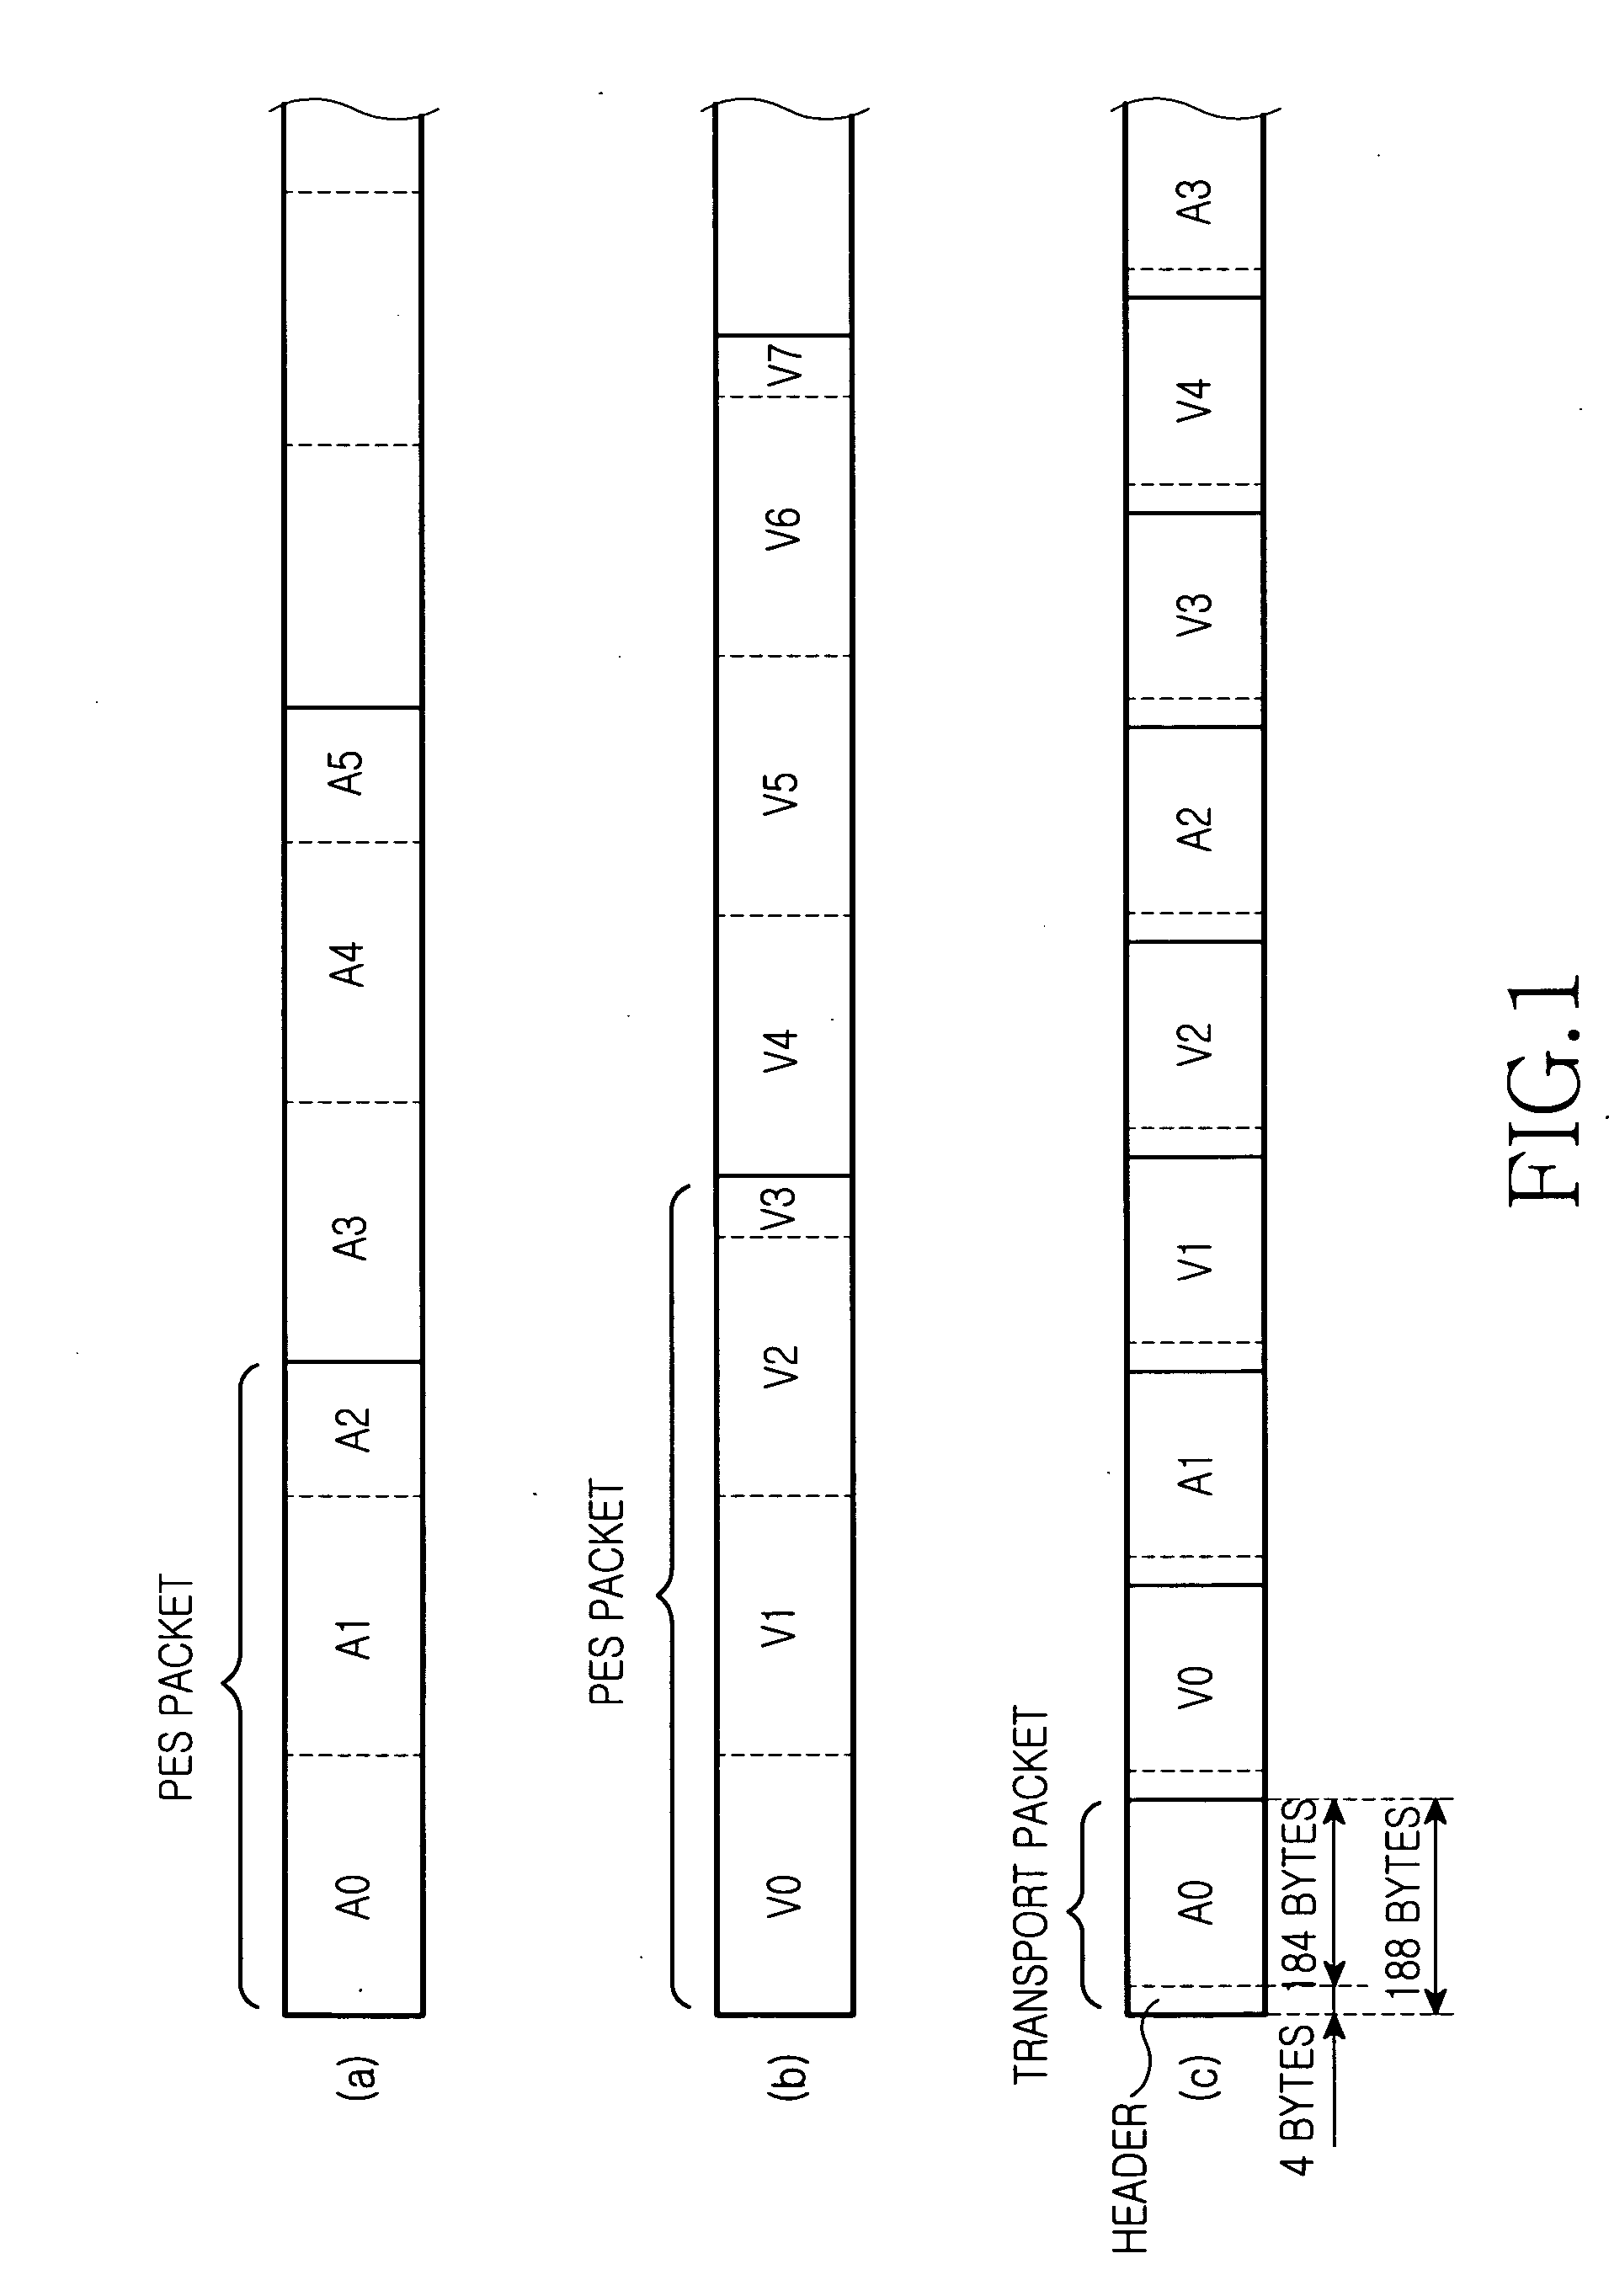 Apparatus and method for inserting and extracting value added data in transport stream-based MPEG-2 system